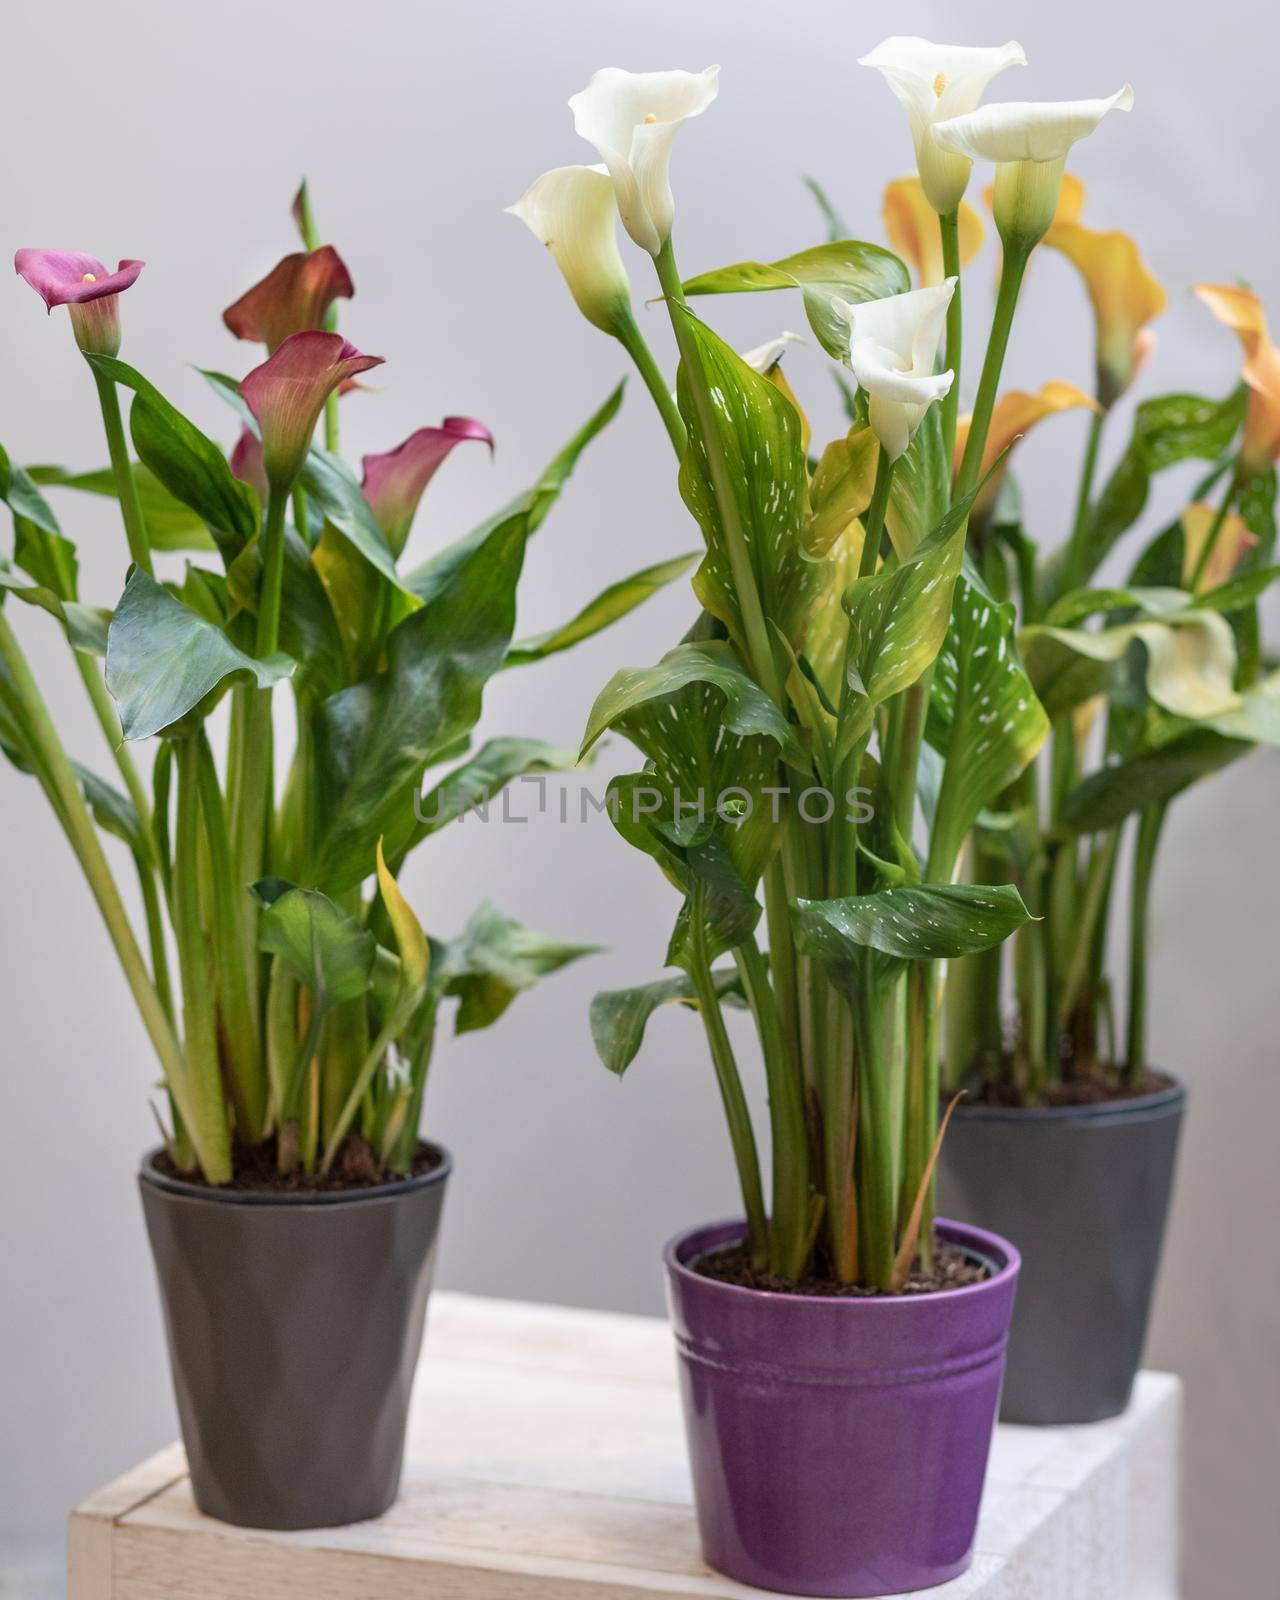 Colorful Arum lily flower plants by ferhad